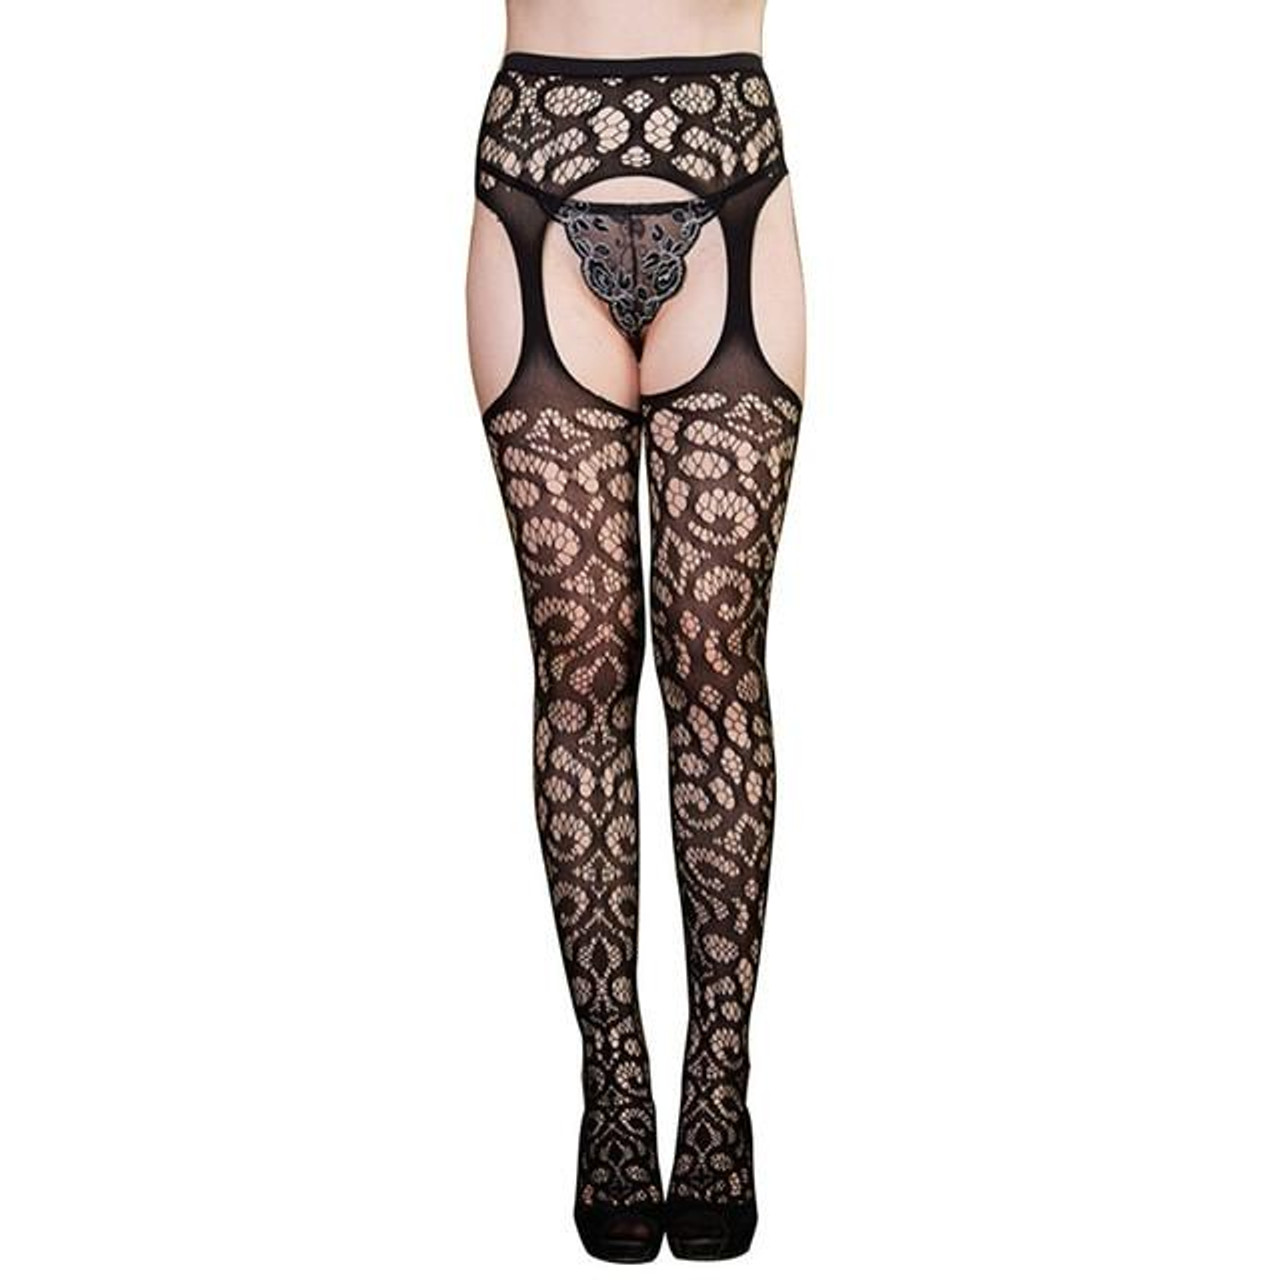 Tights & Hosiery for Women, Ladies fishnet tights, lace and opaque  stockings